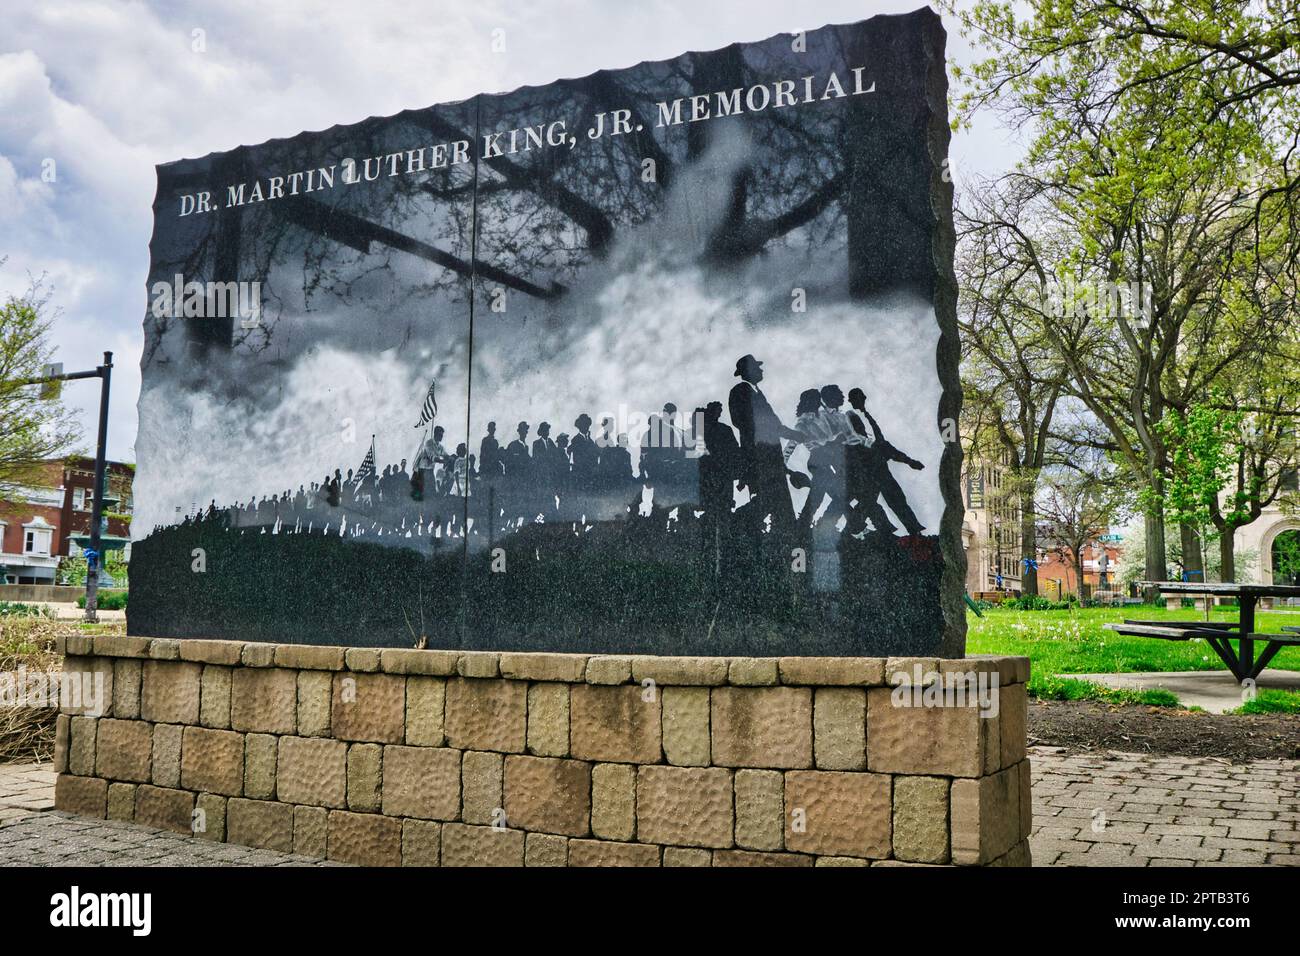 Martin Luther King, Jr. Memorial - Mansfield, OH USA 2023 Stockfoto